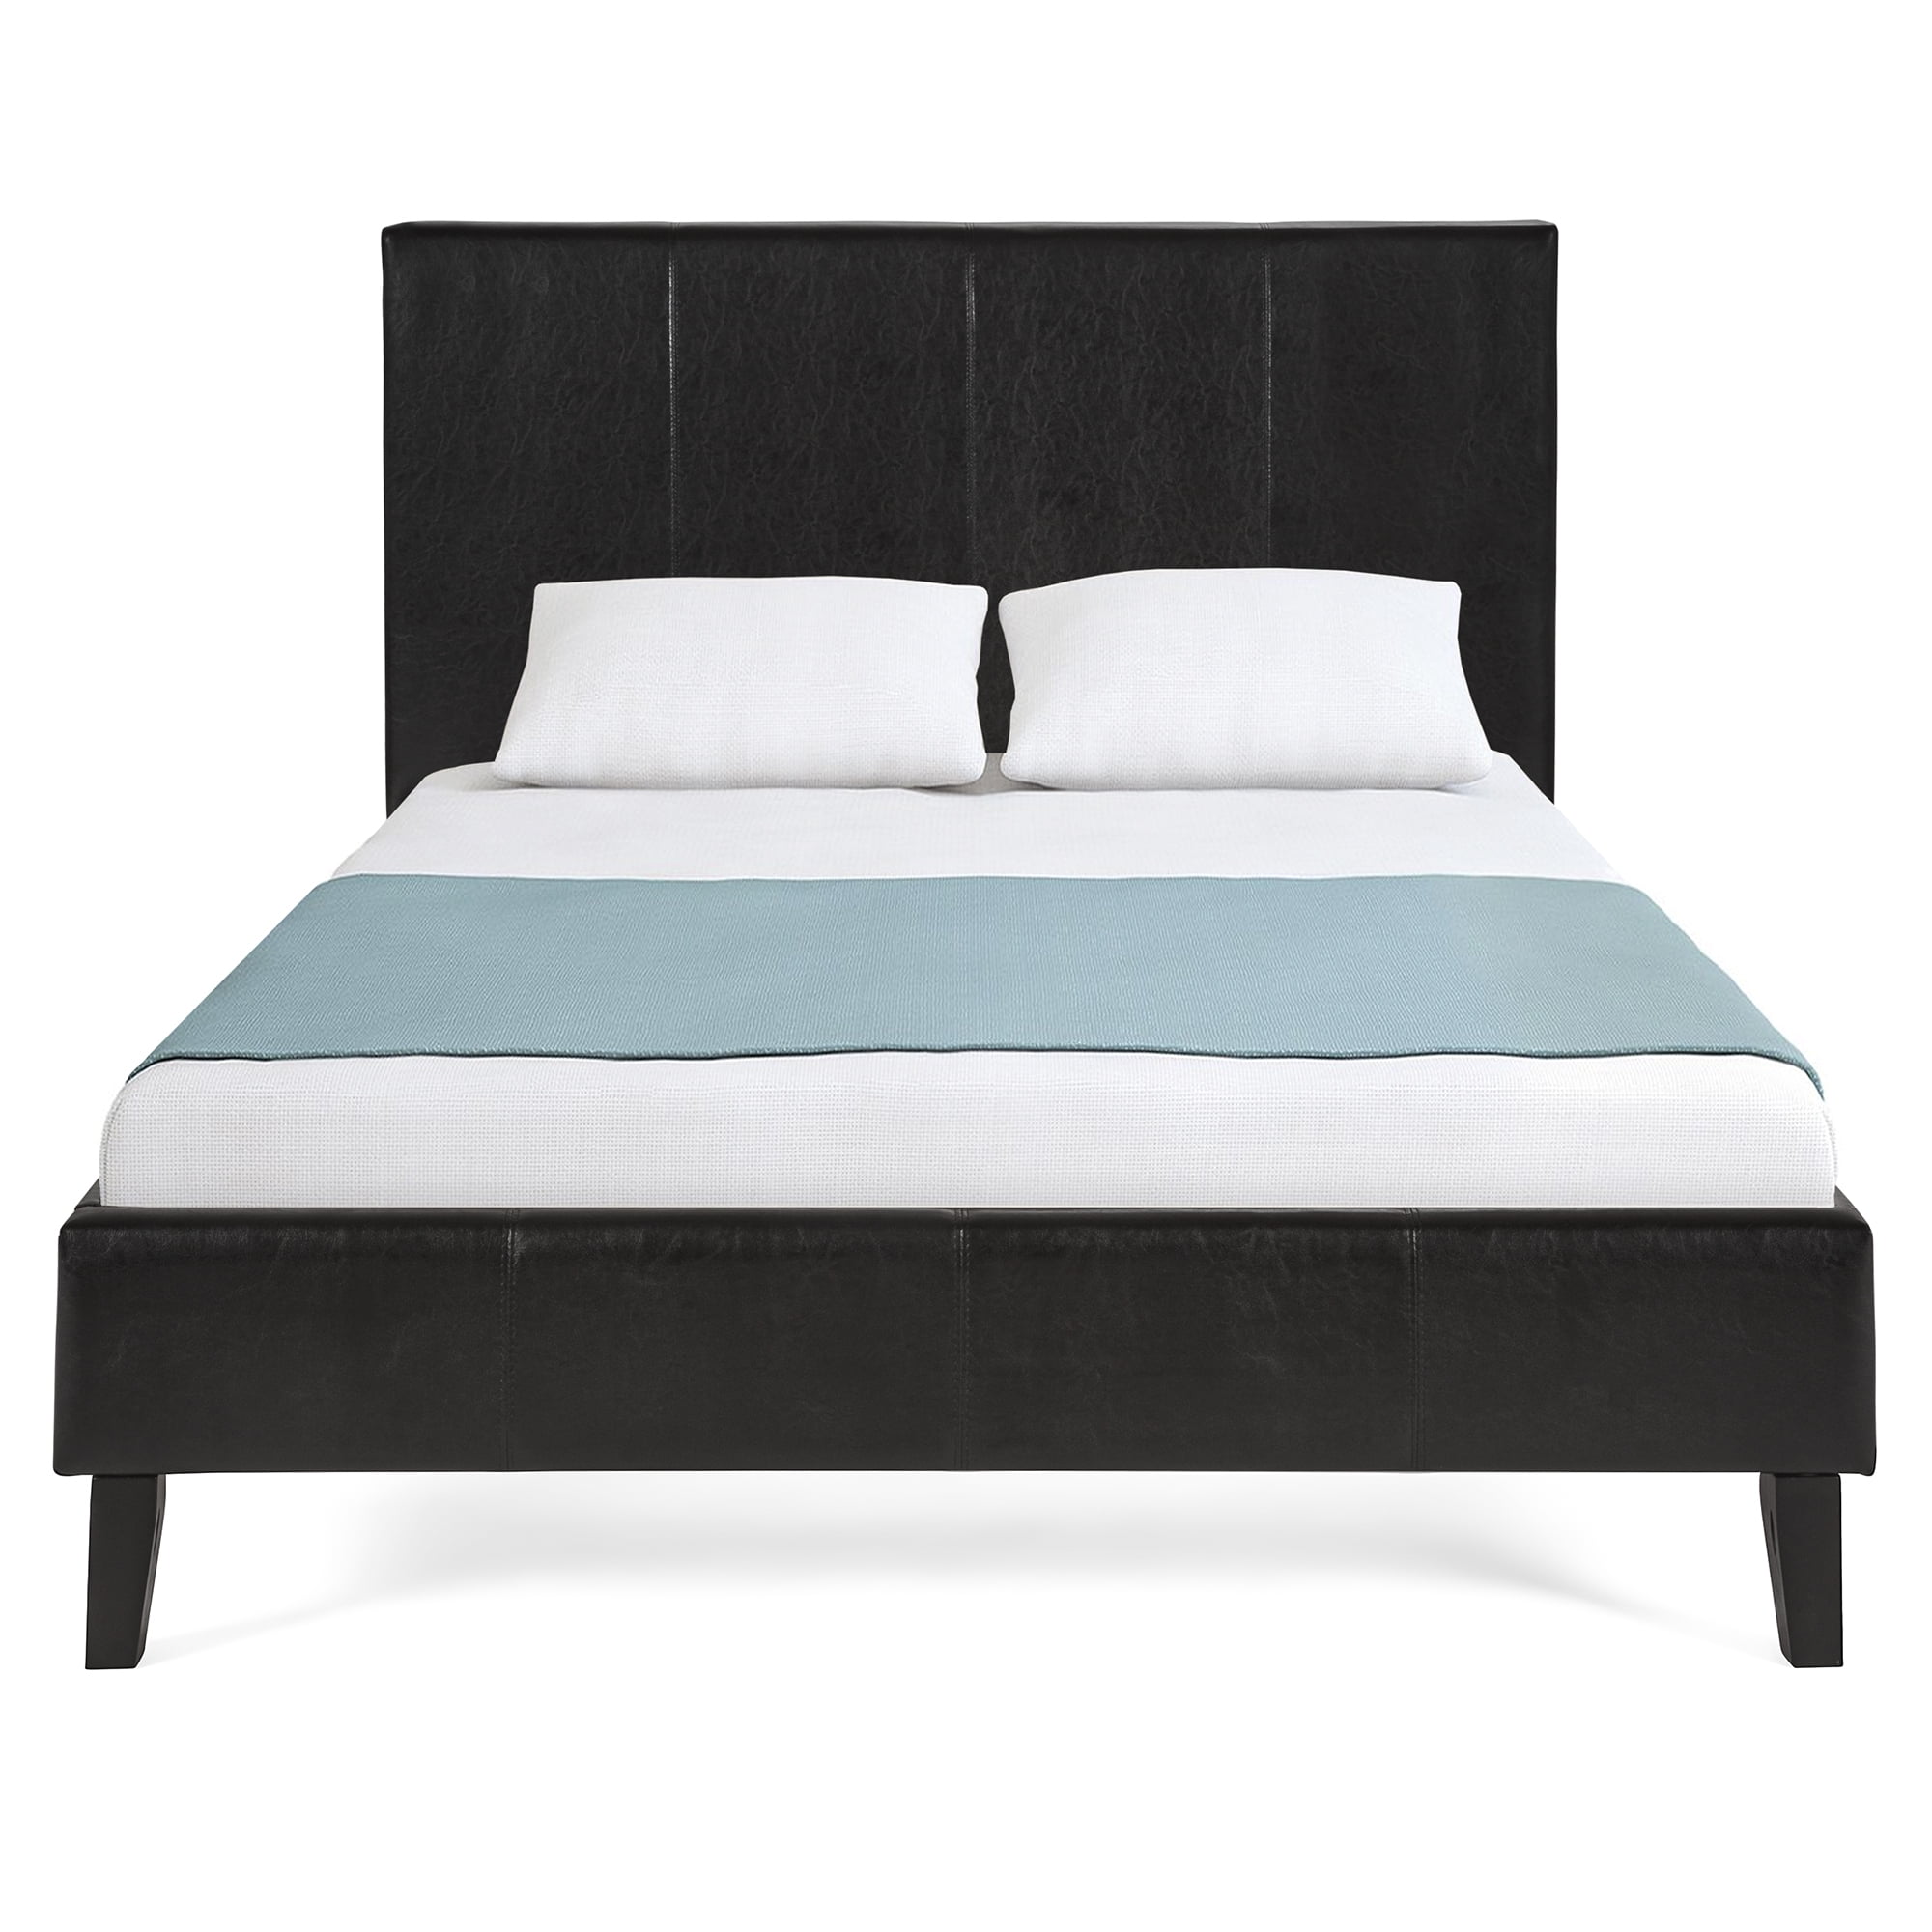 Faux Leather Platform Bed Frame, Adjustable Bed Frame For Headboards And Footboards Queen